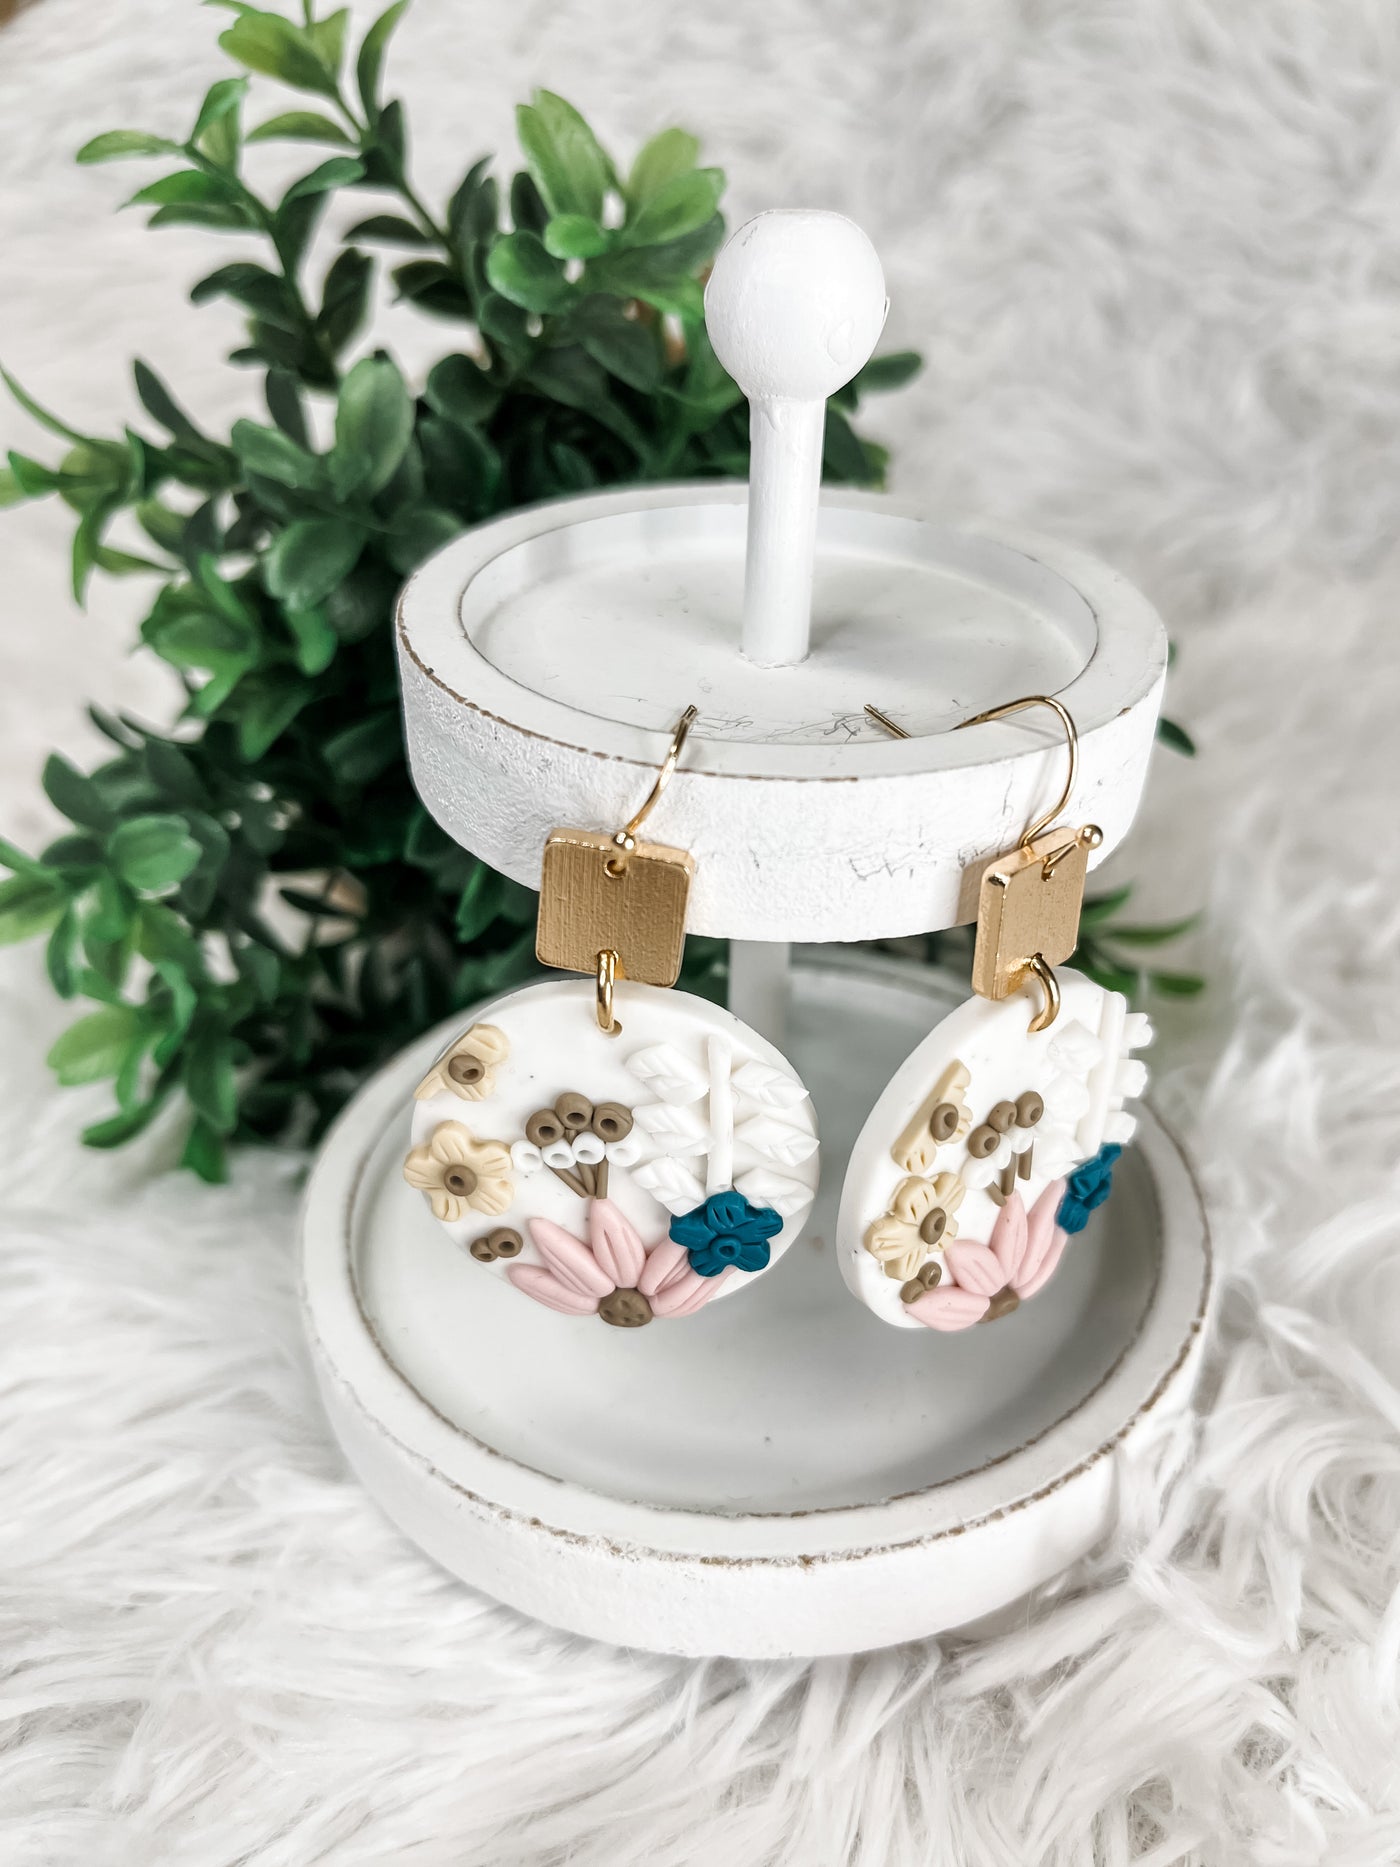 Too Cute To Be True! Round White Clay Earrings